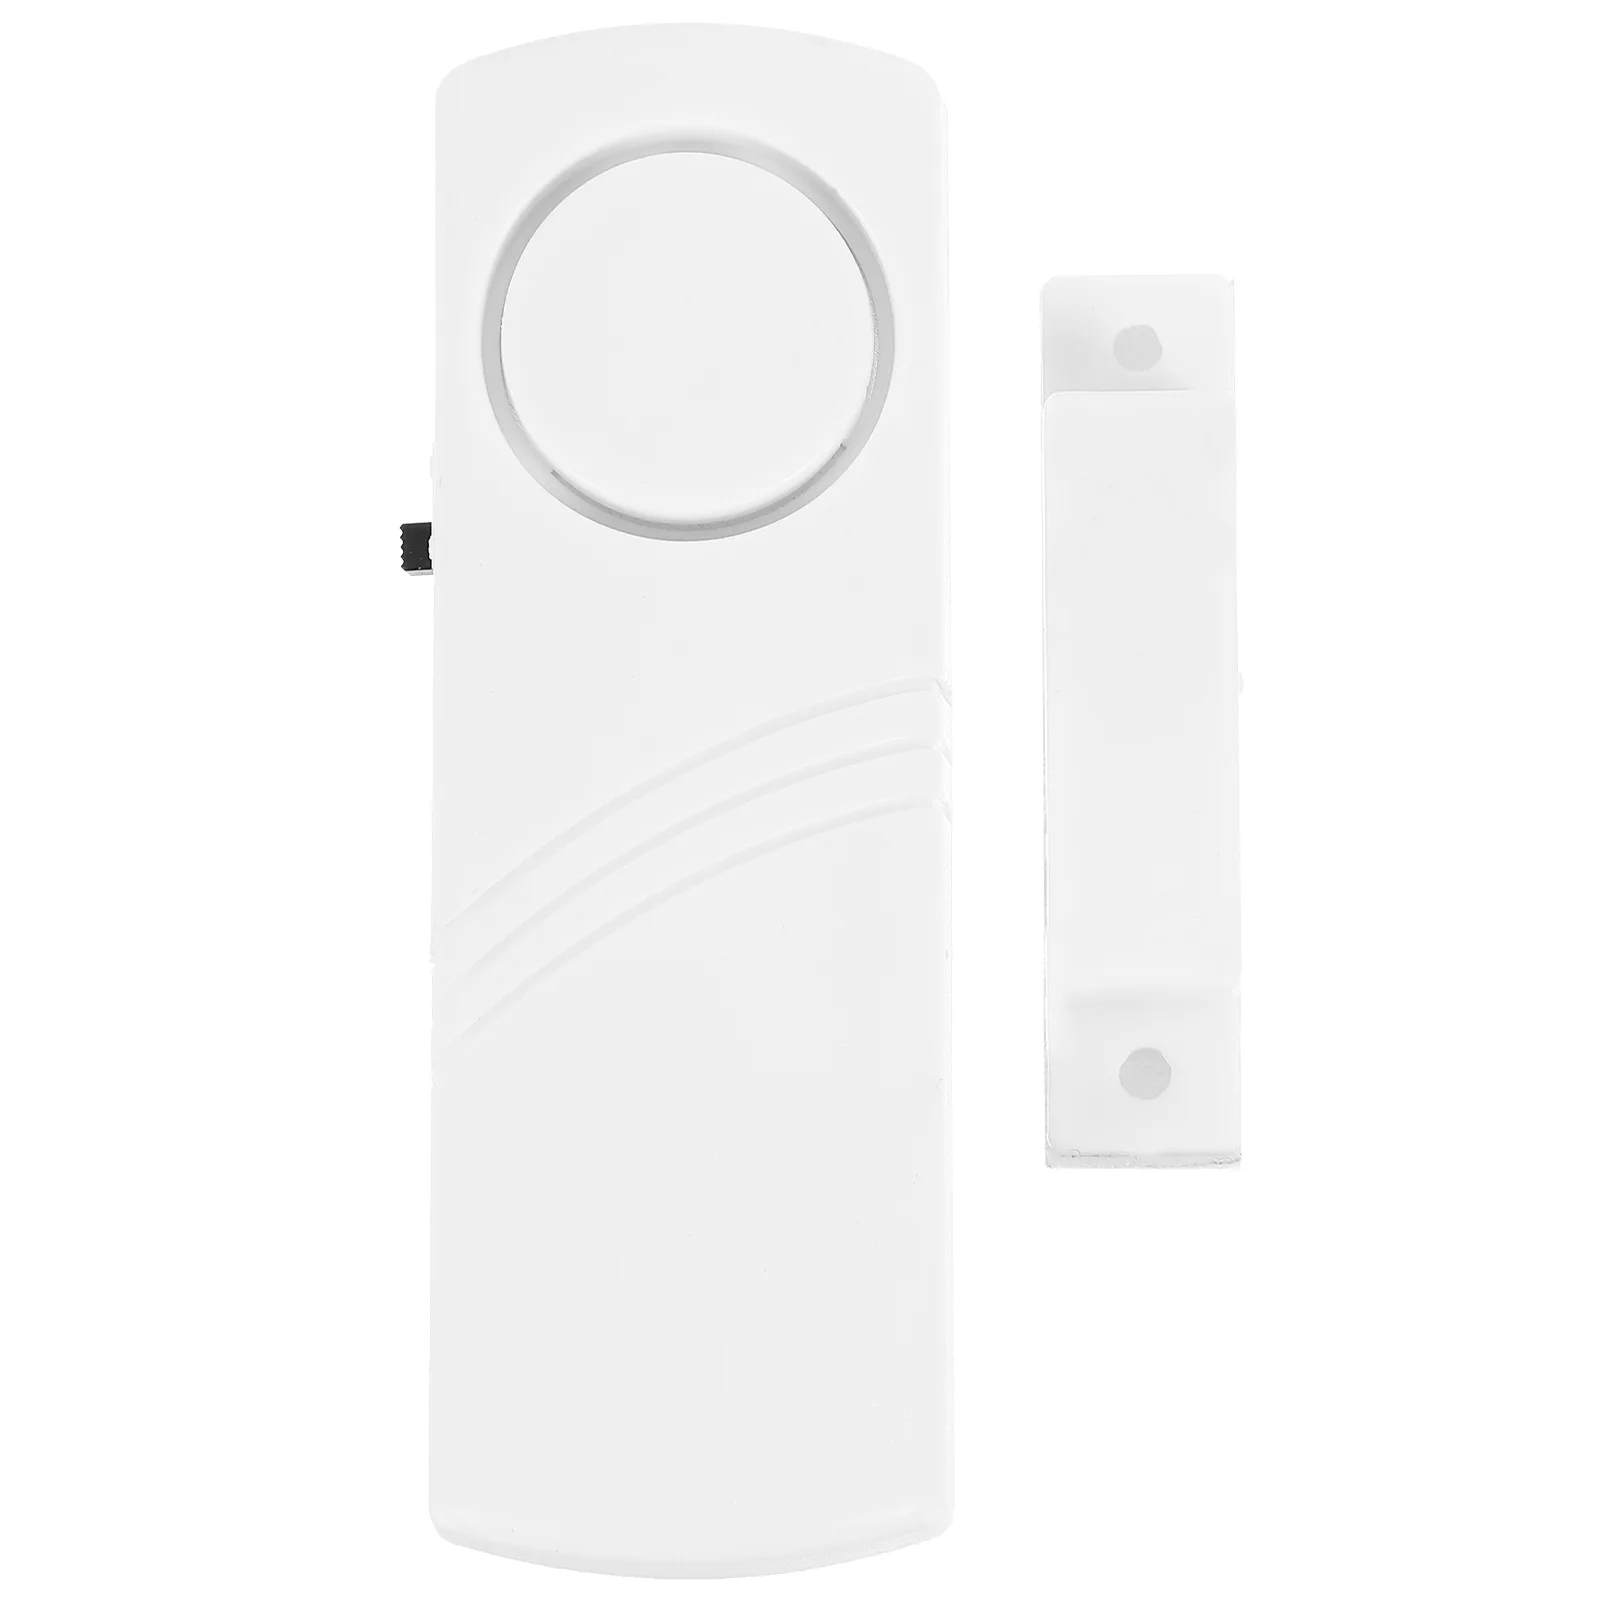 

Motion Sensors Door and Window Alarm Chime Sports Open The Home Security